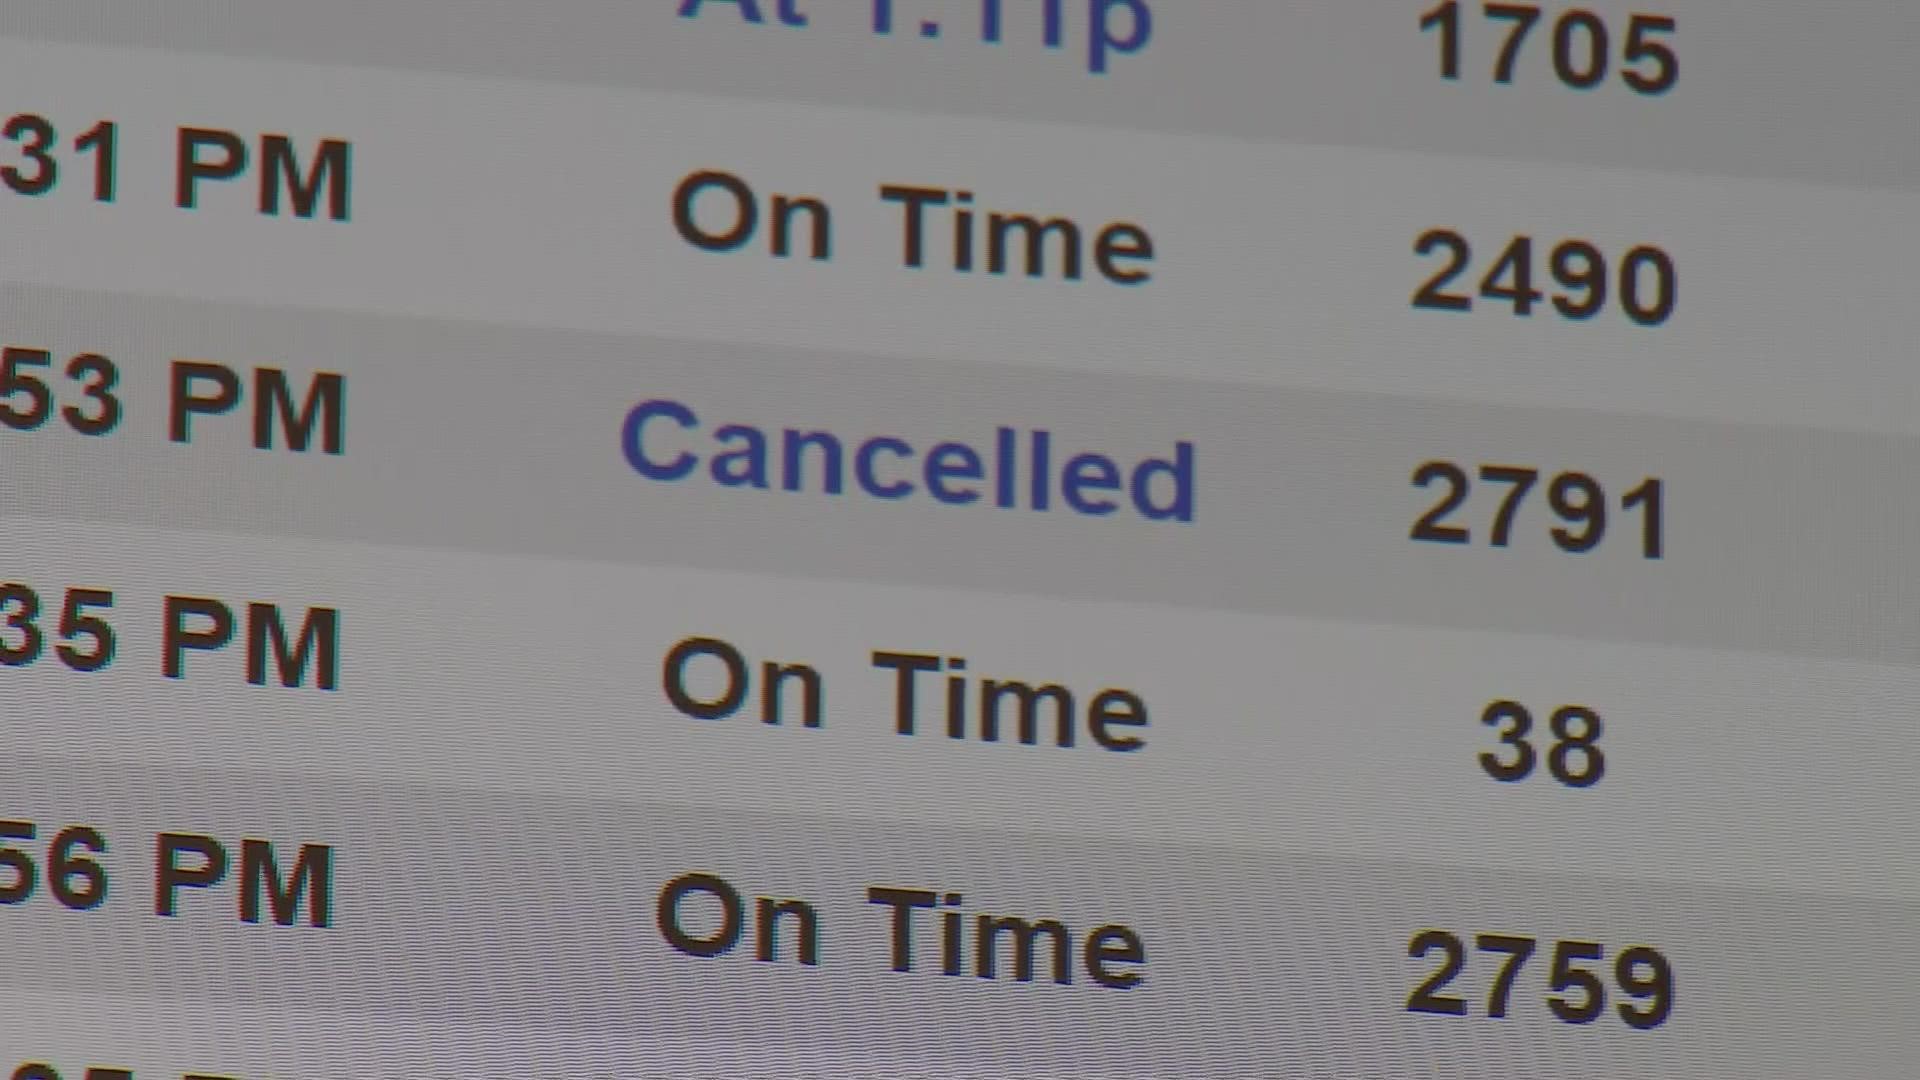 Hundreds of canceled flights left passengers across the U.S. scrambling to get home. So what can you do if your flight is canceled? What are your rights?